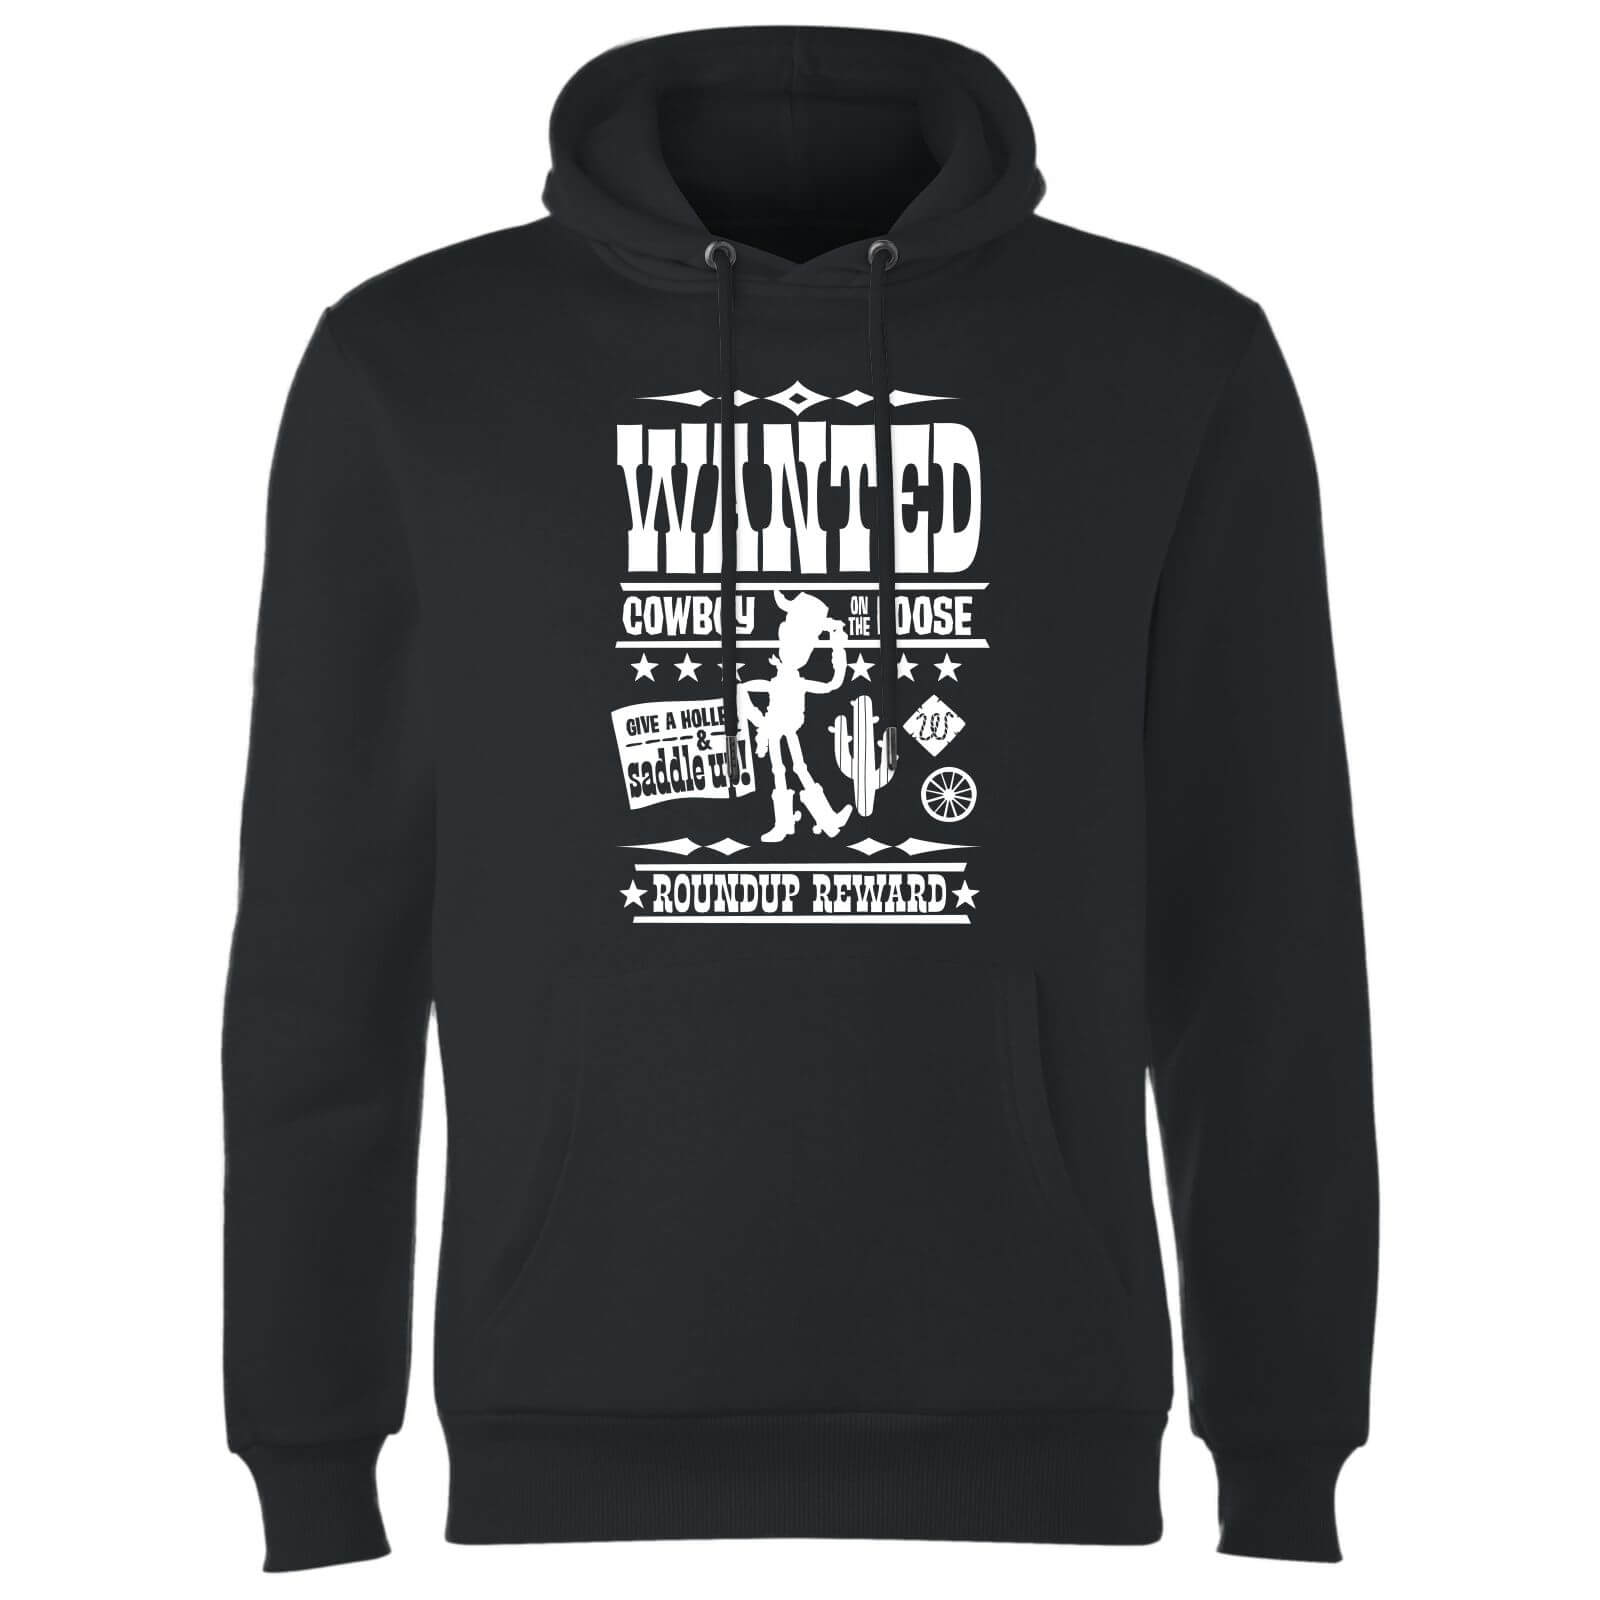 Toy Story Wanted Poster Hoodie - Black - L